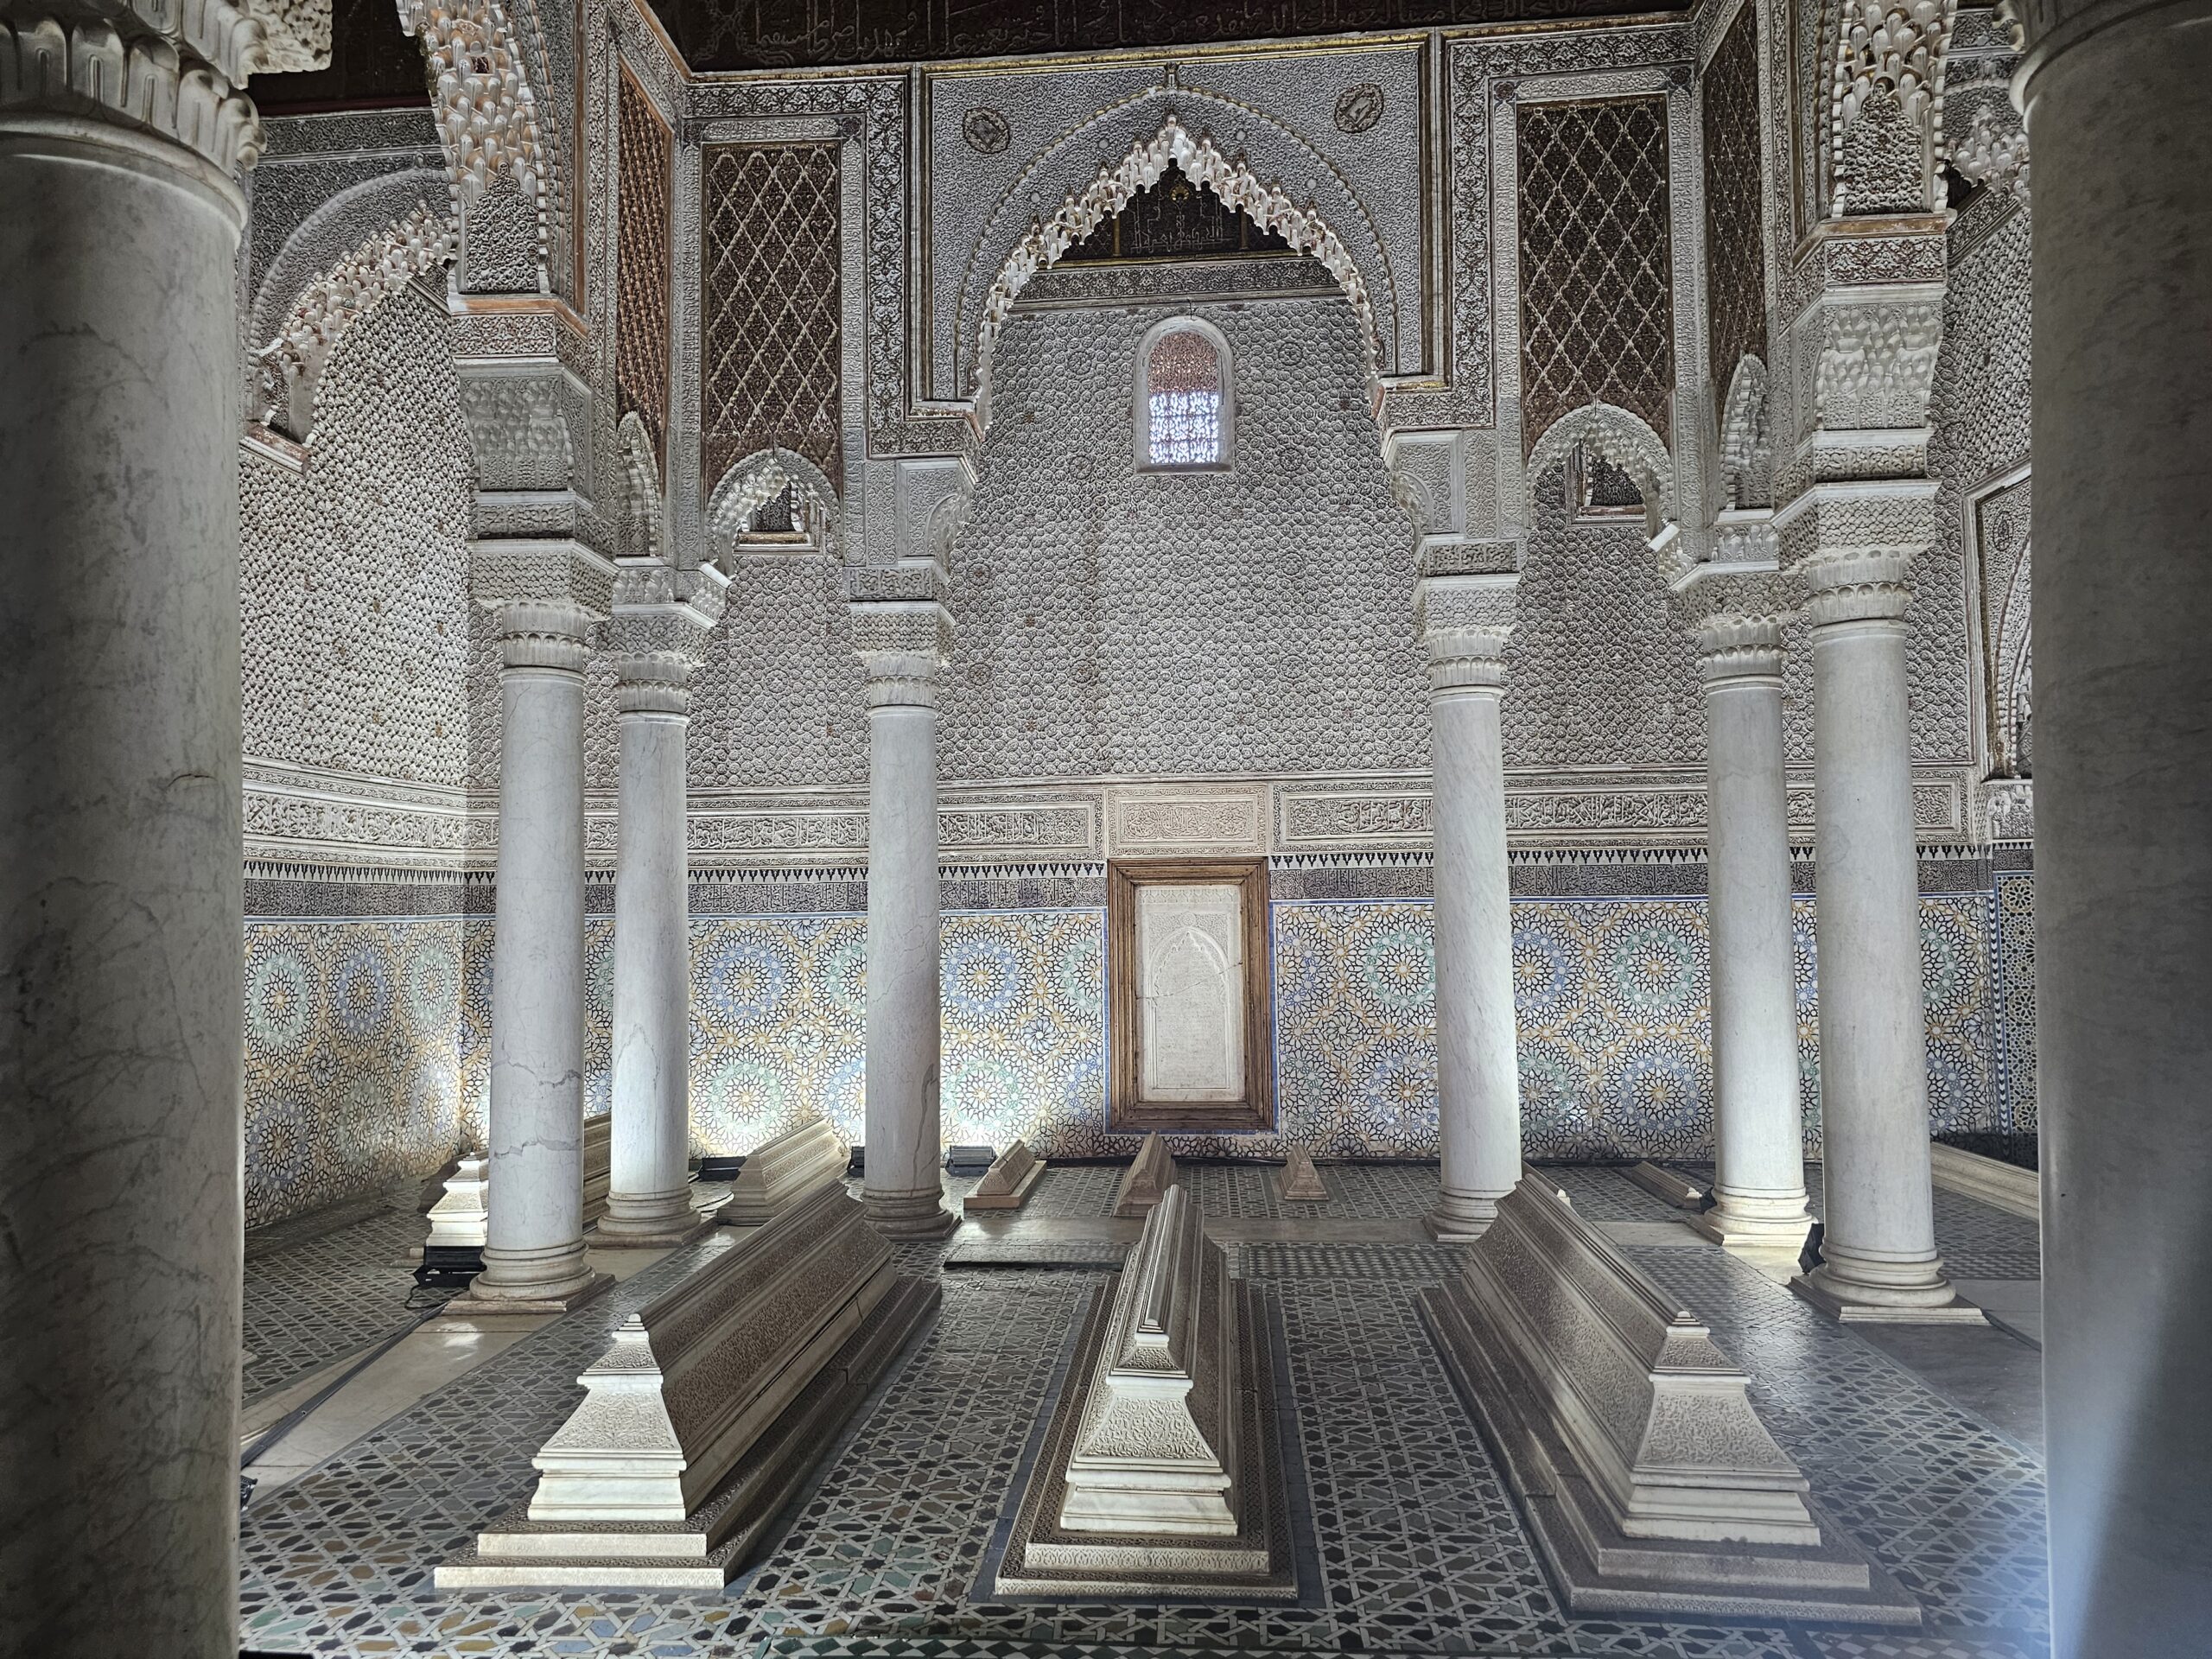 Graves inside Saadian Tombs, Marrakesh. This chamber is known as the room of 12 pillars. Image by 360onhistory.com